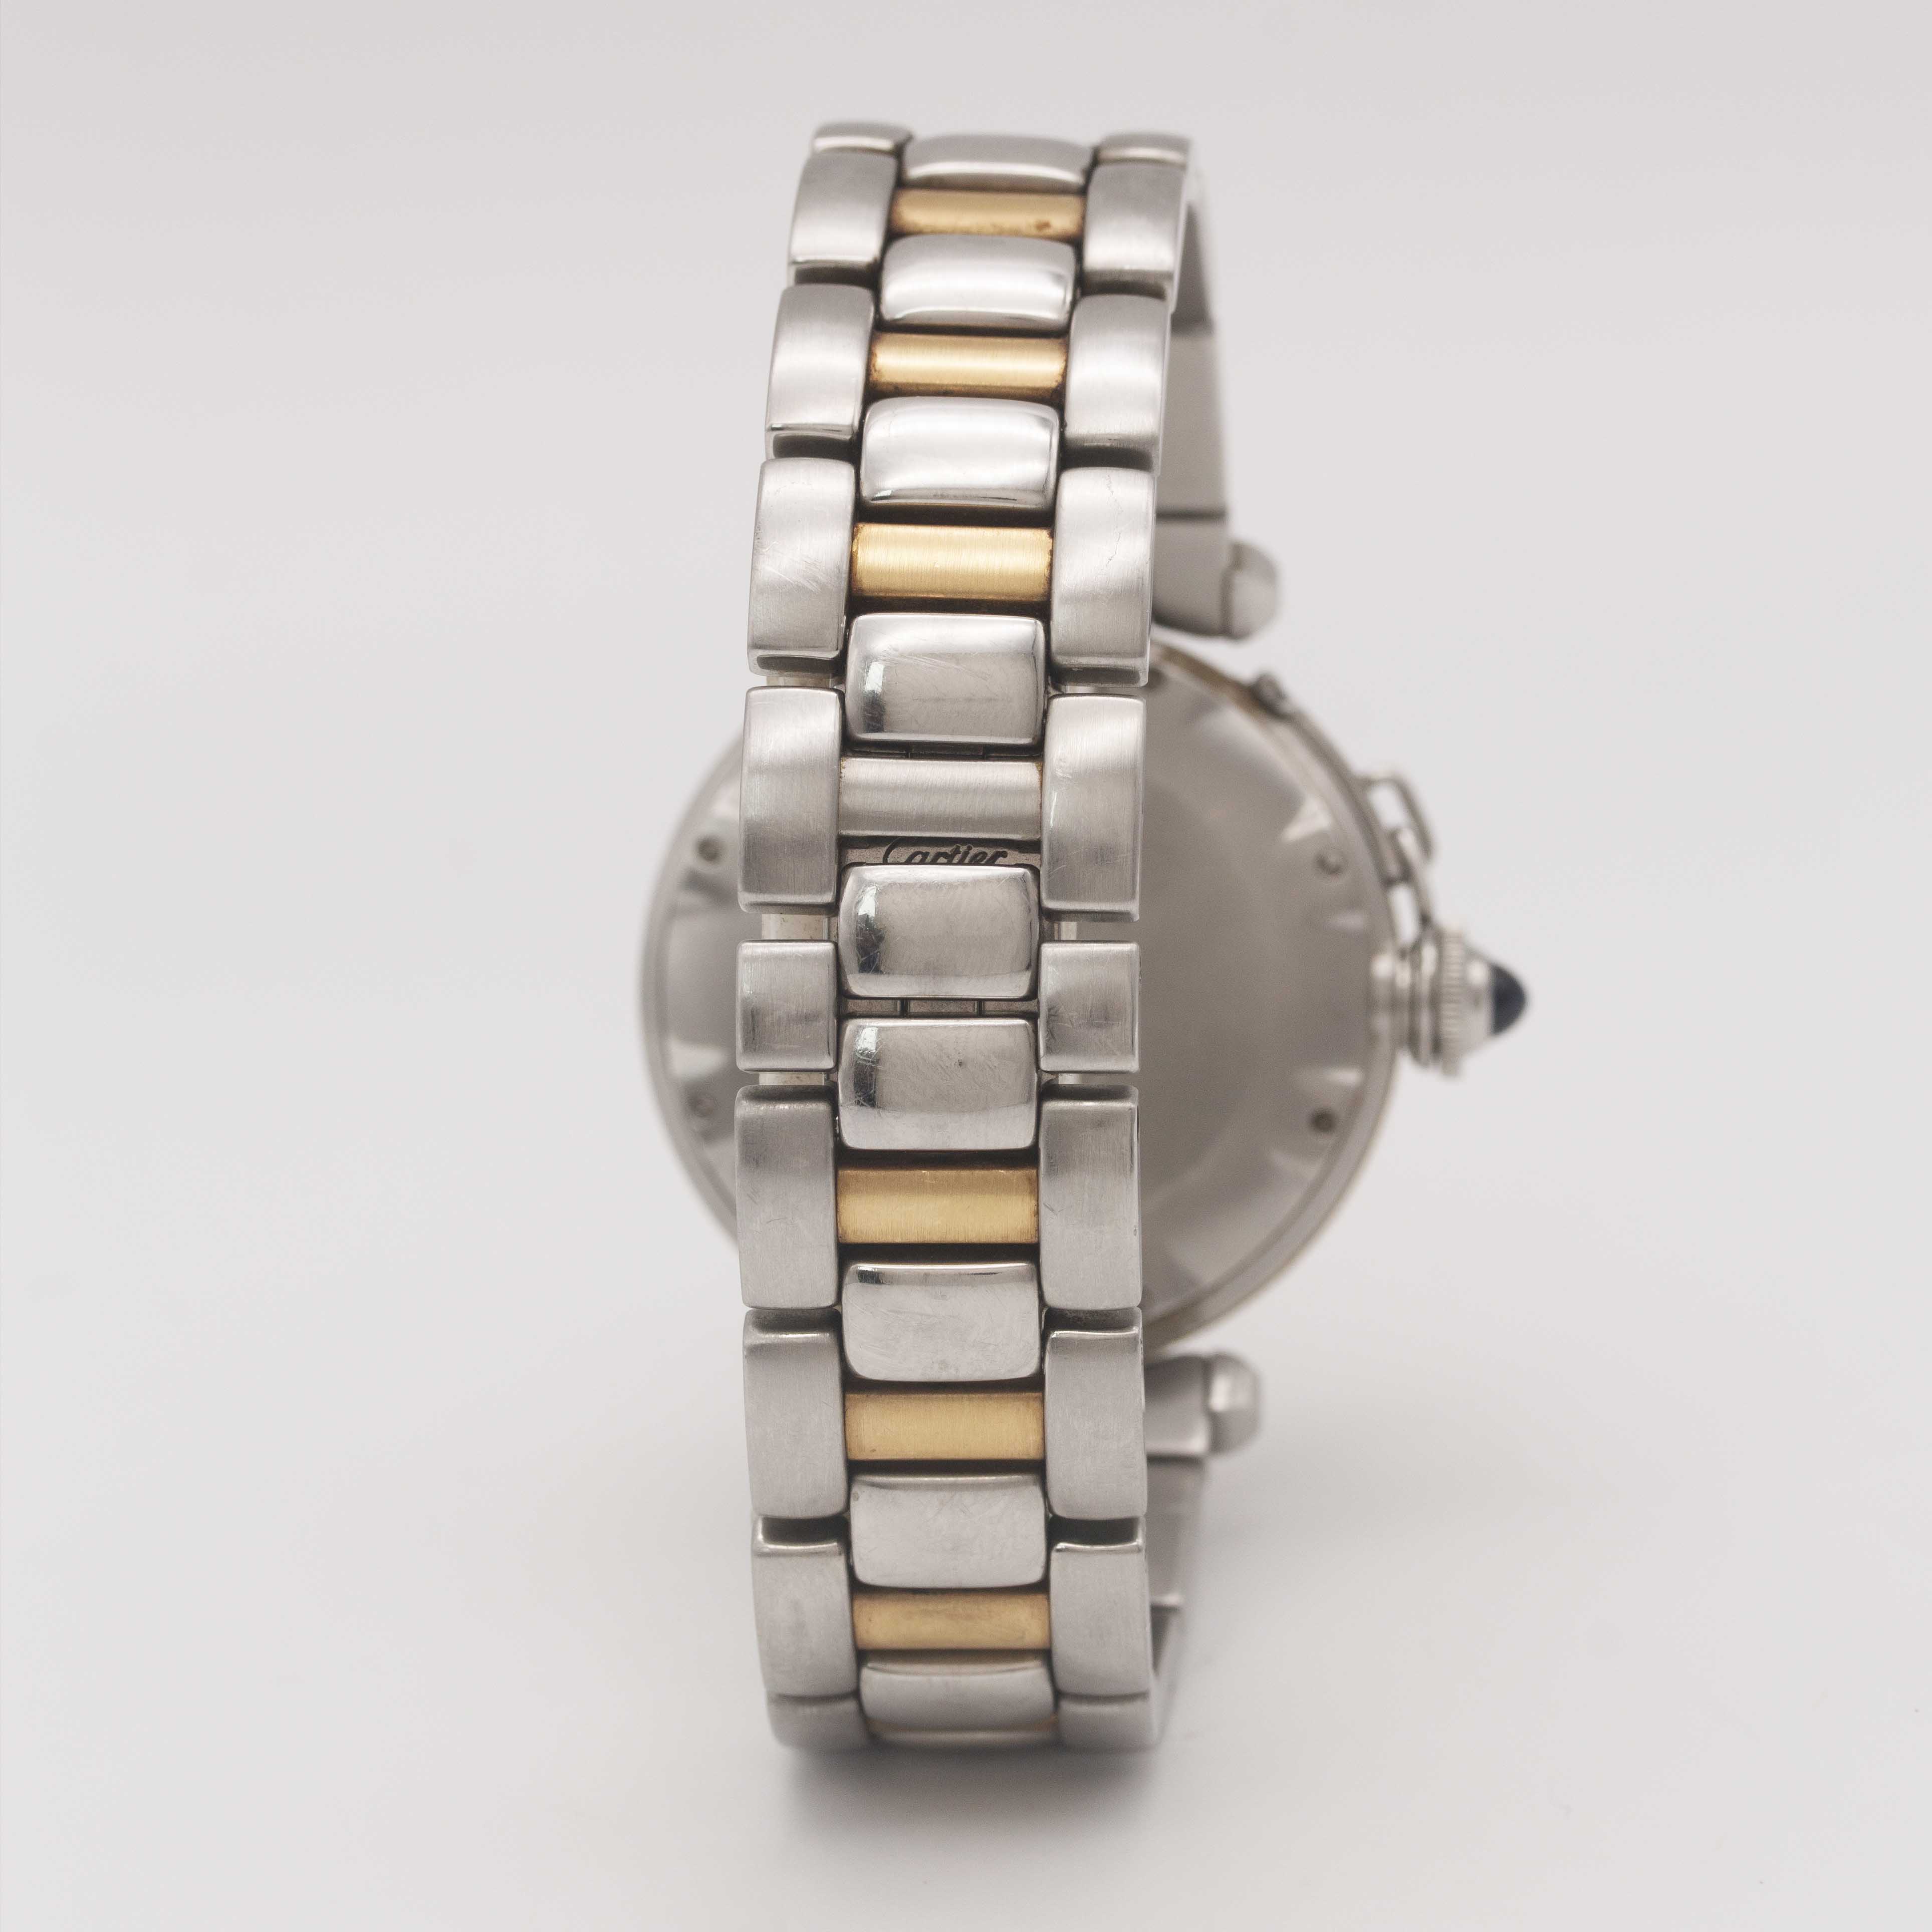 A GENTLEMAN'S SIZE STEEL & GOLD CARTIER PASHA AUTOMATIC POWER RESERVE BRACELET WATCH CIRCA 2000, - Image 6 of 9